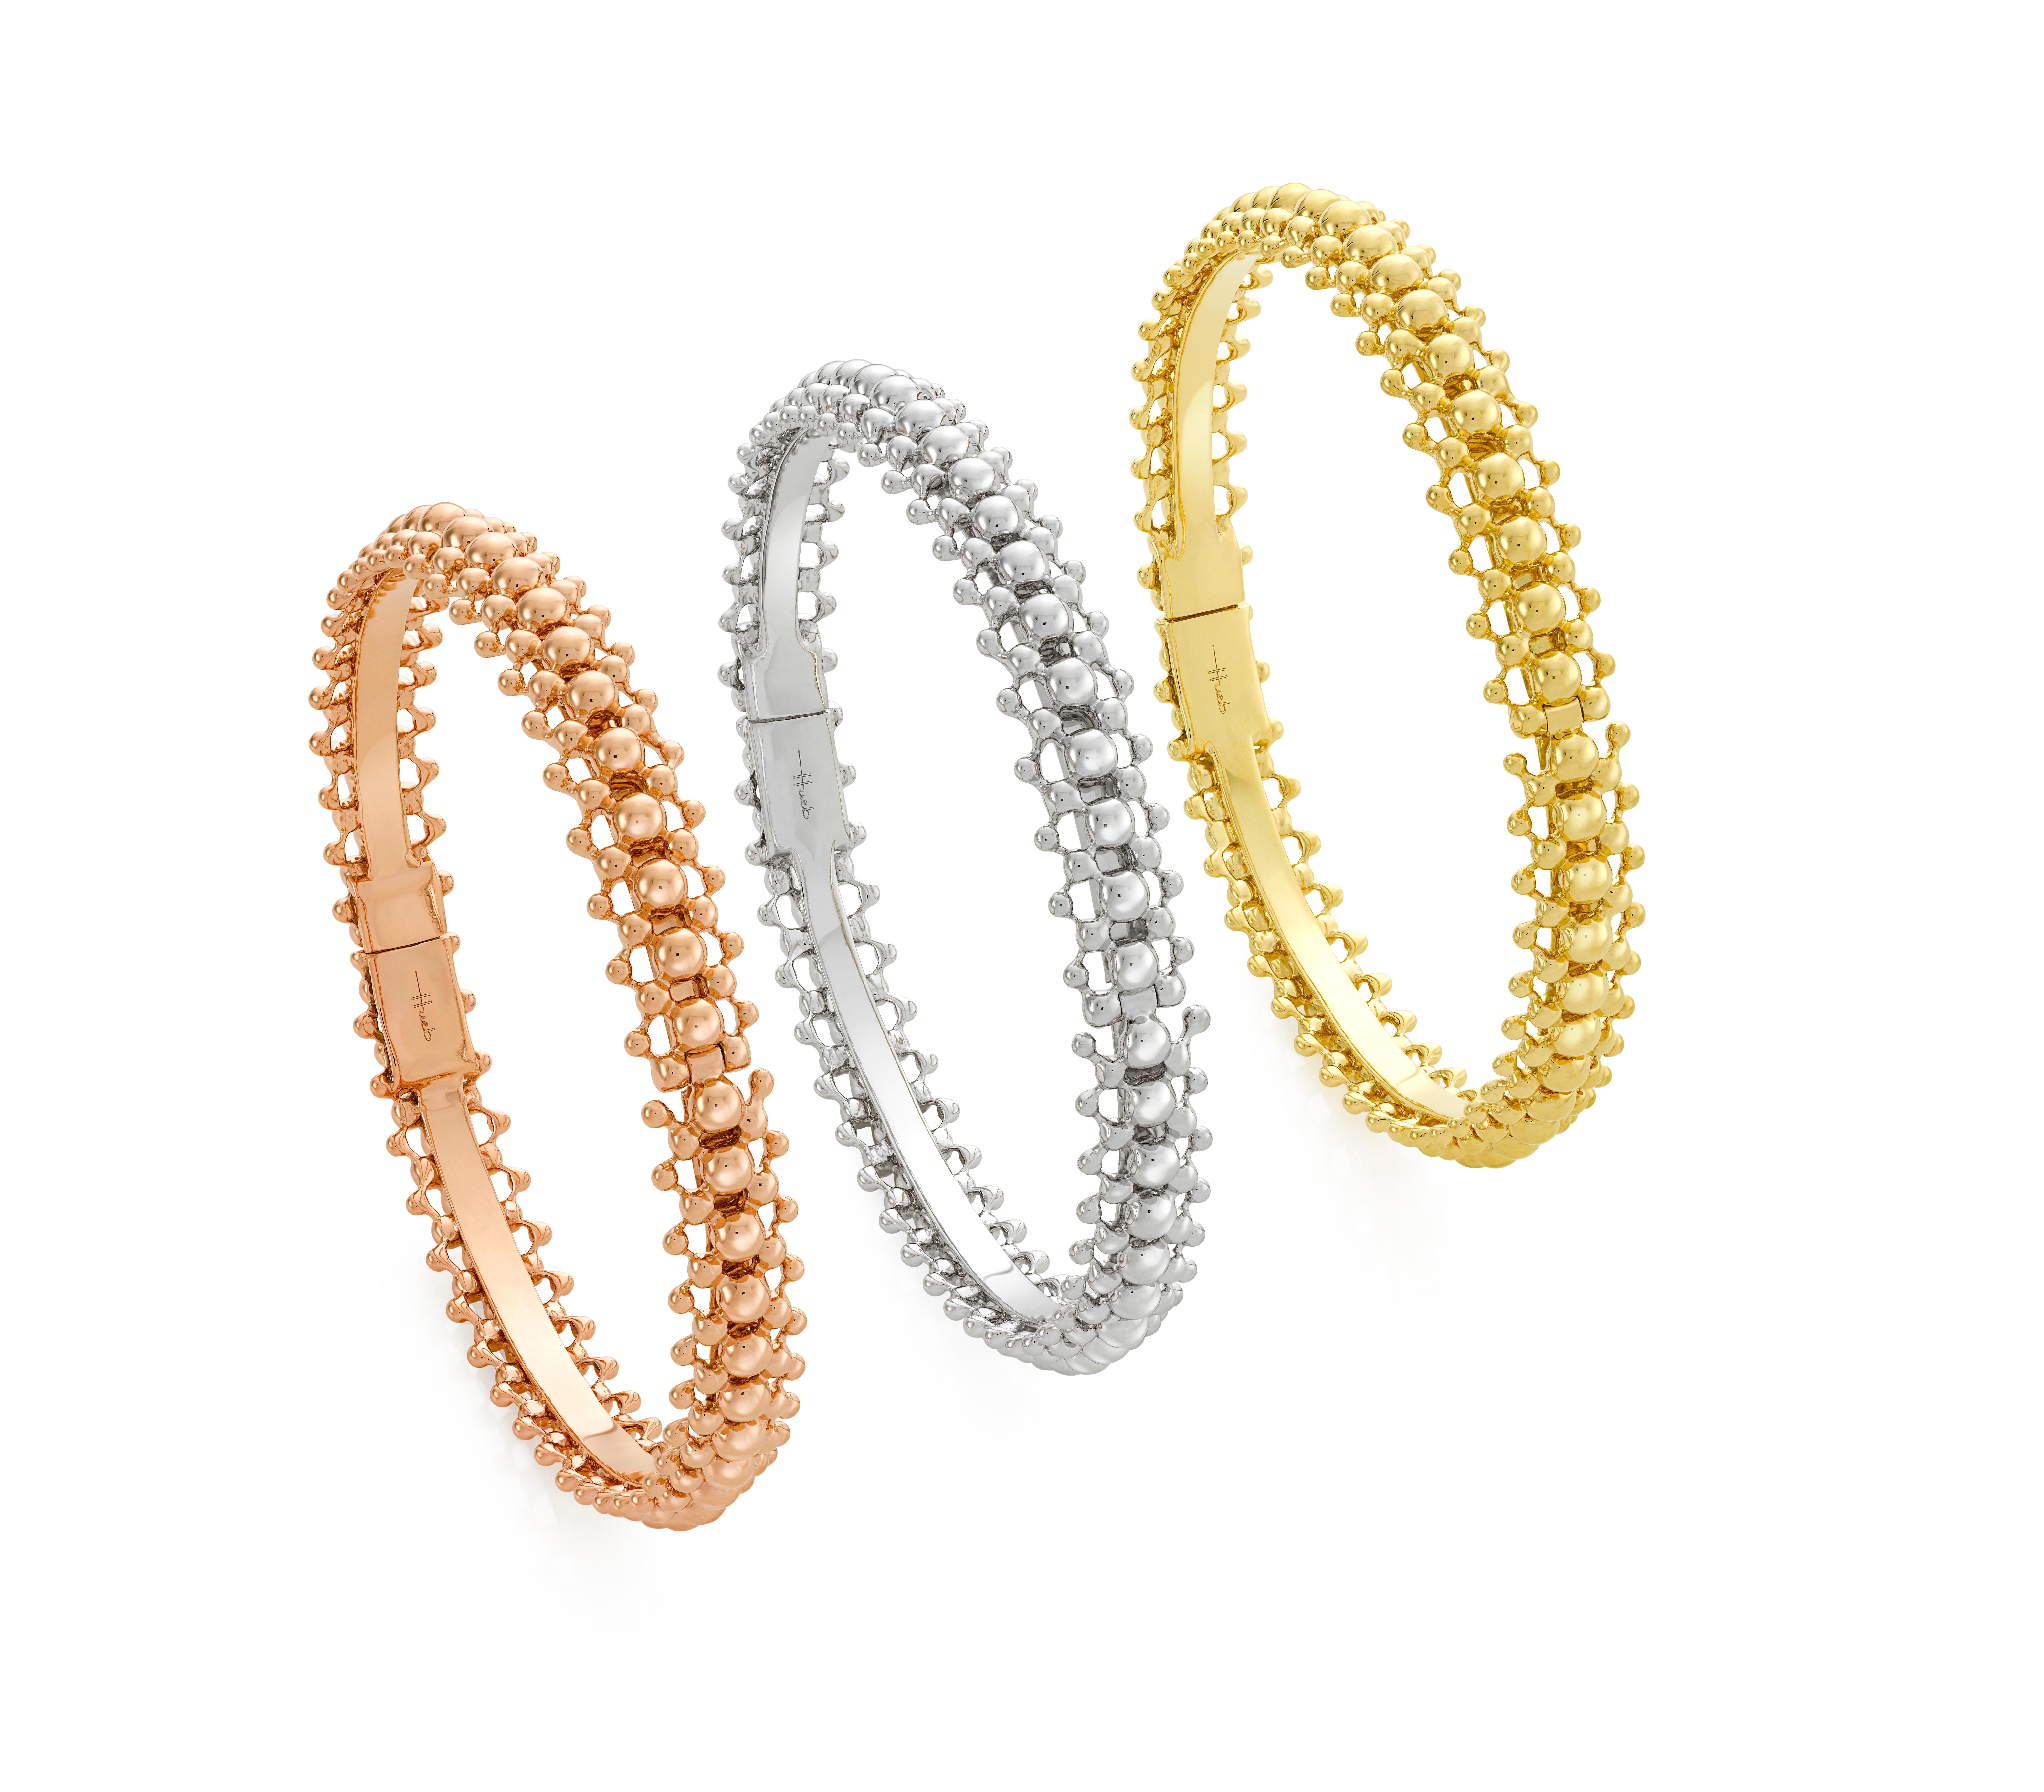 Inspired by all things effervescent, the Bubbles collection features 18k gold and diamond pieces that speak to versatility. The range of bangles, hoop earrings and rings can be mixed and matched, stacked and worn all day, every day